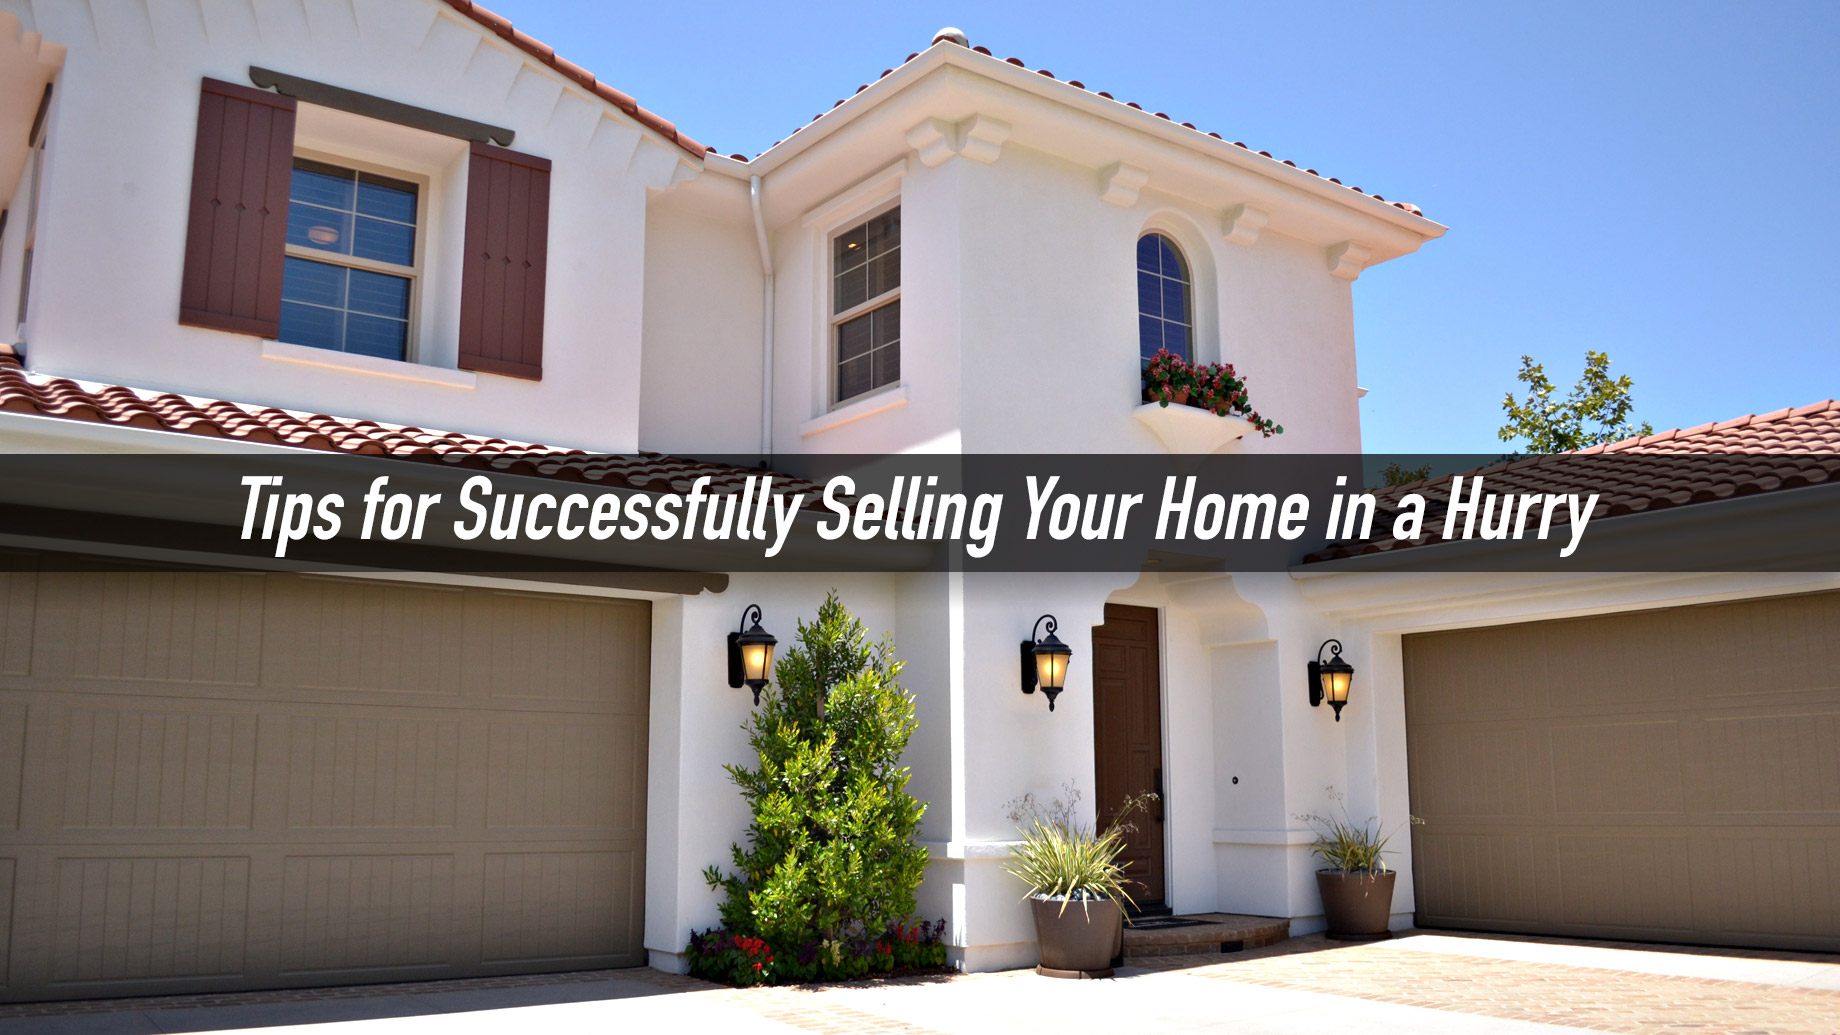 Tips for Successfully Selling Your Home in a Hurry